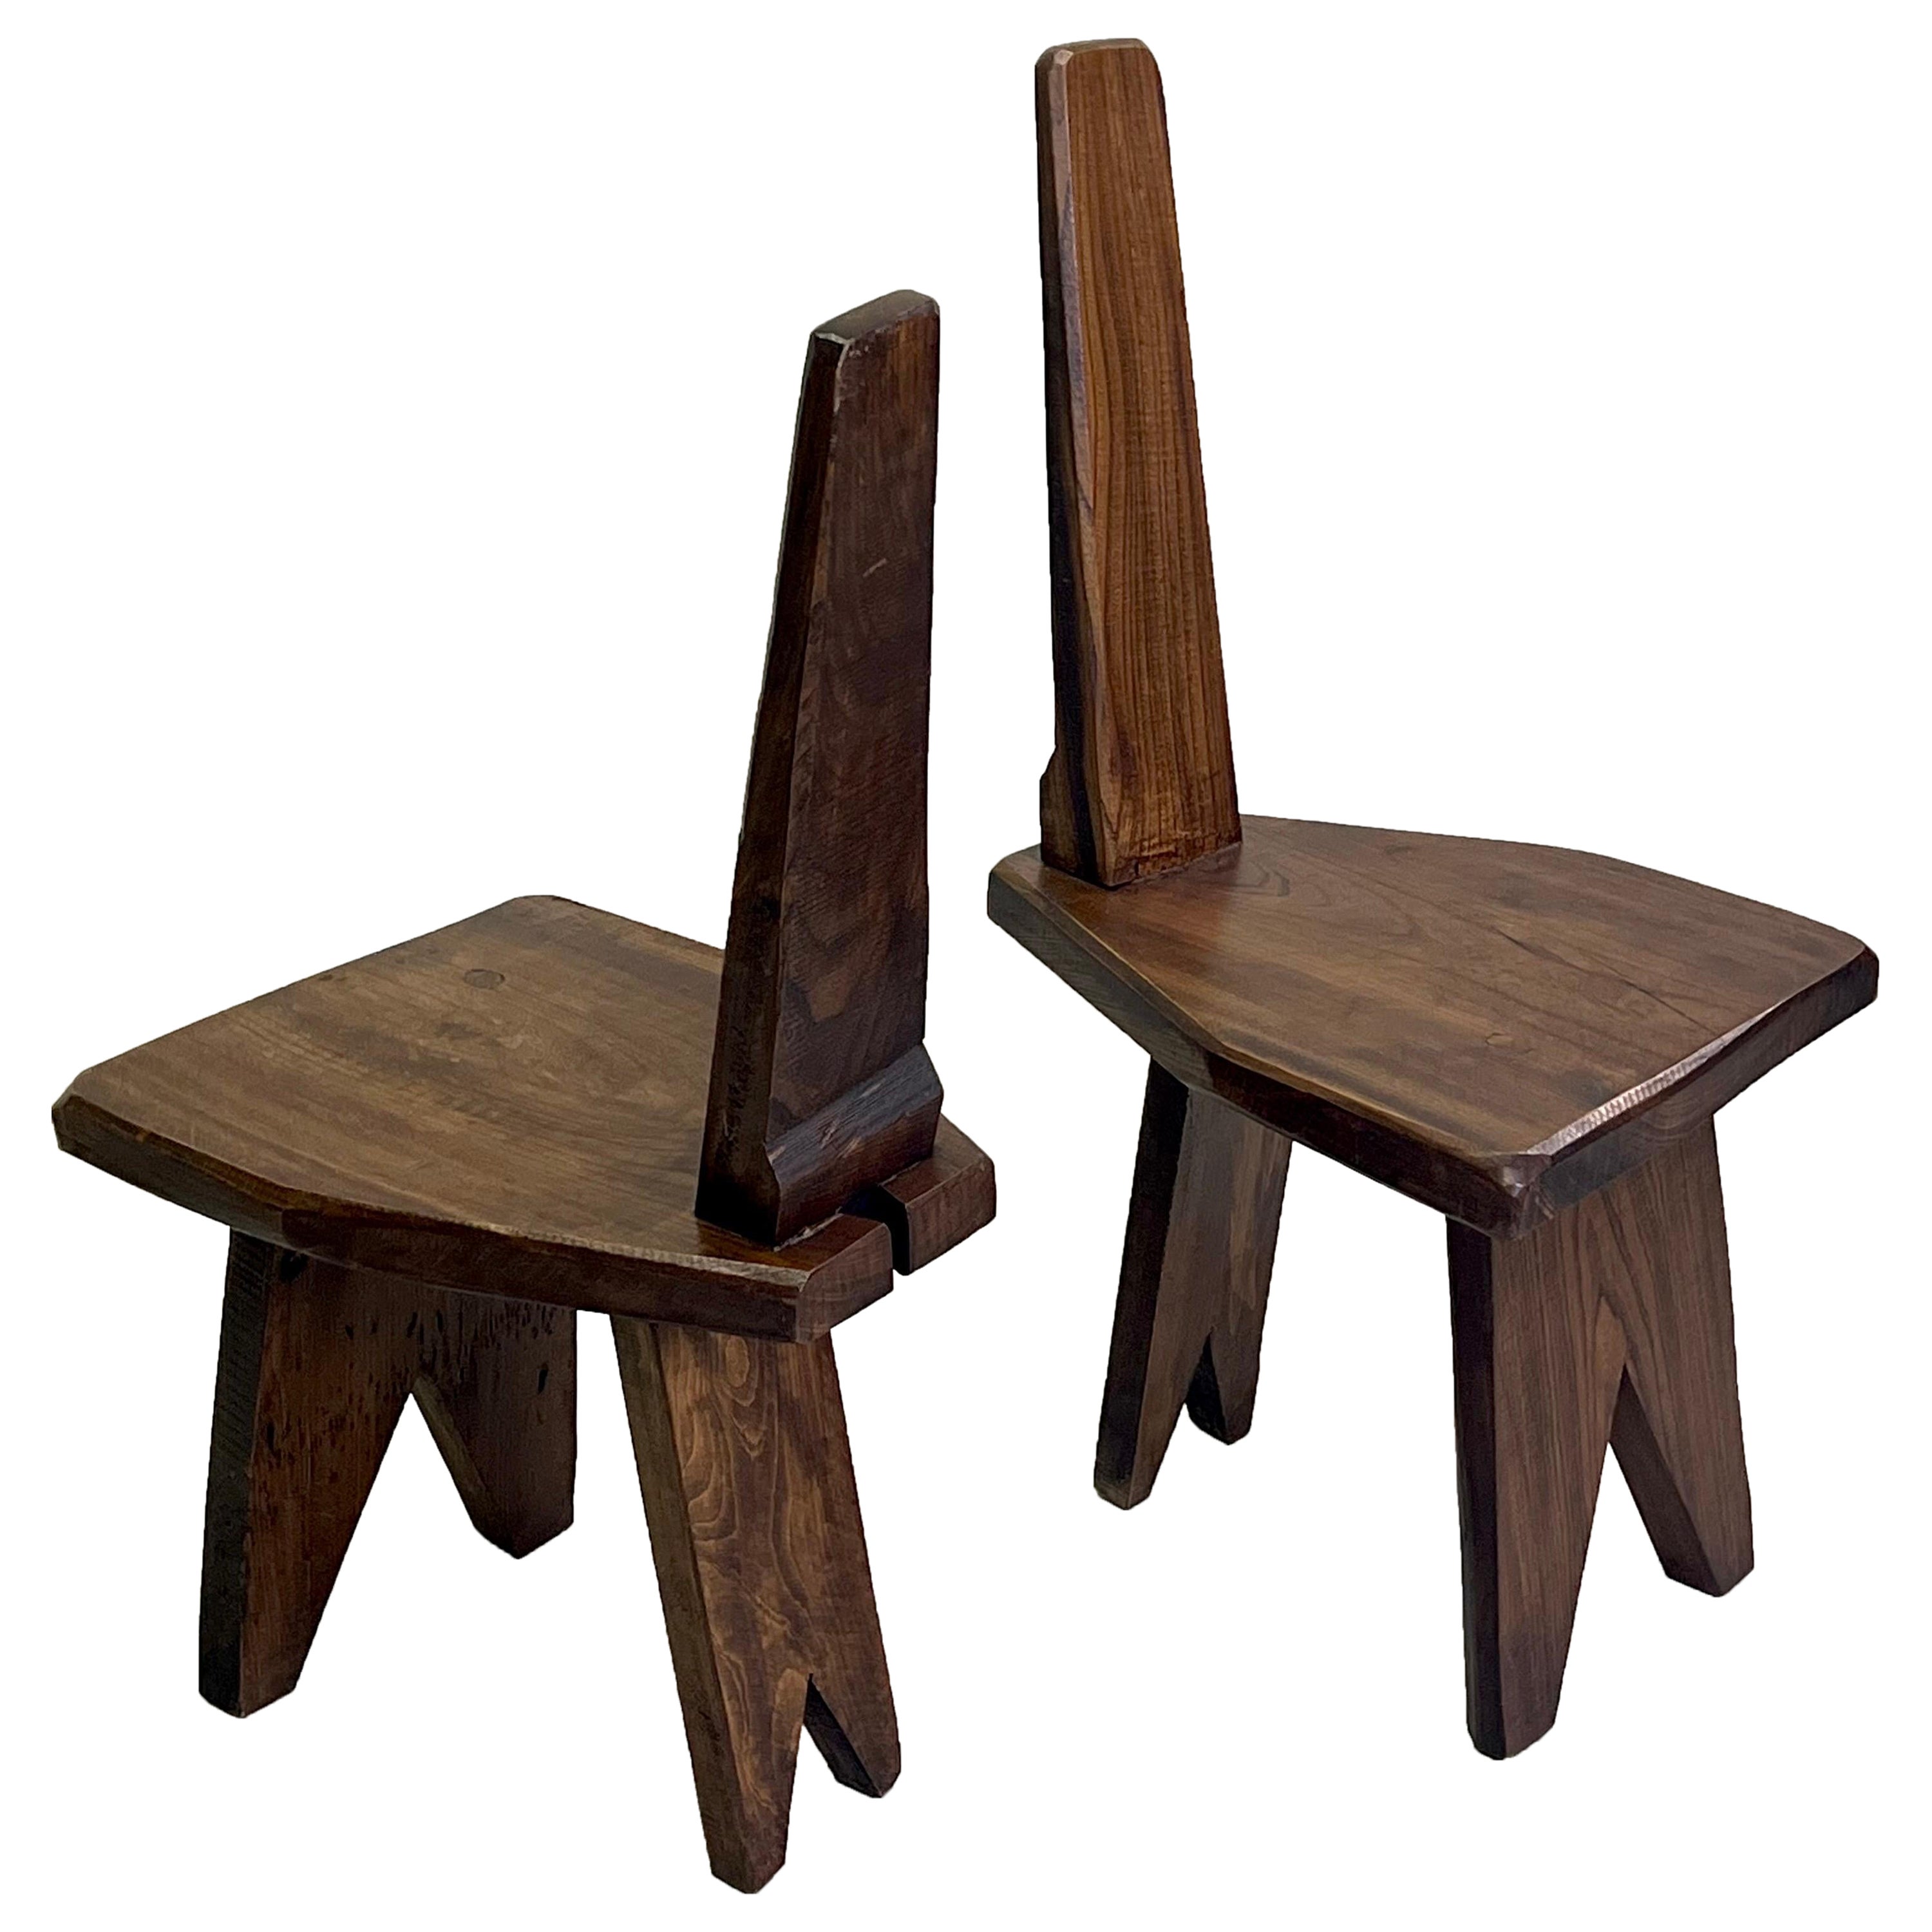 Rare Pair of French Mid-Century Modern Craftsman Wood Chairs, Pierre Jeanneret For Sale